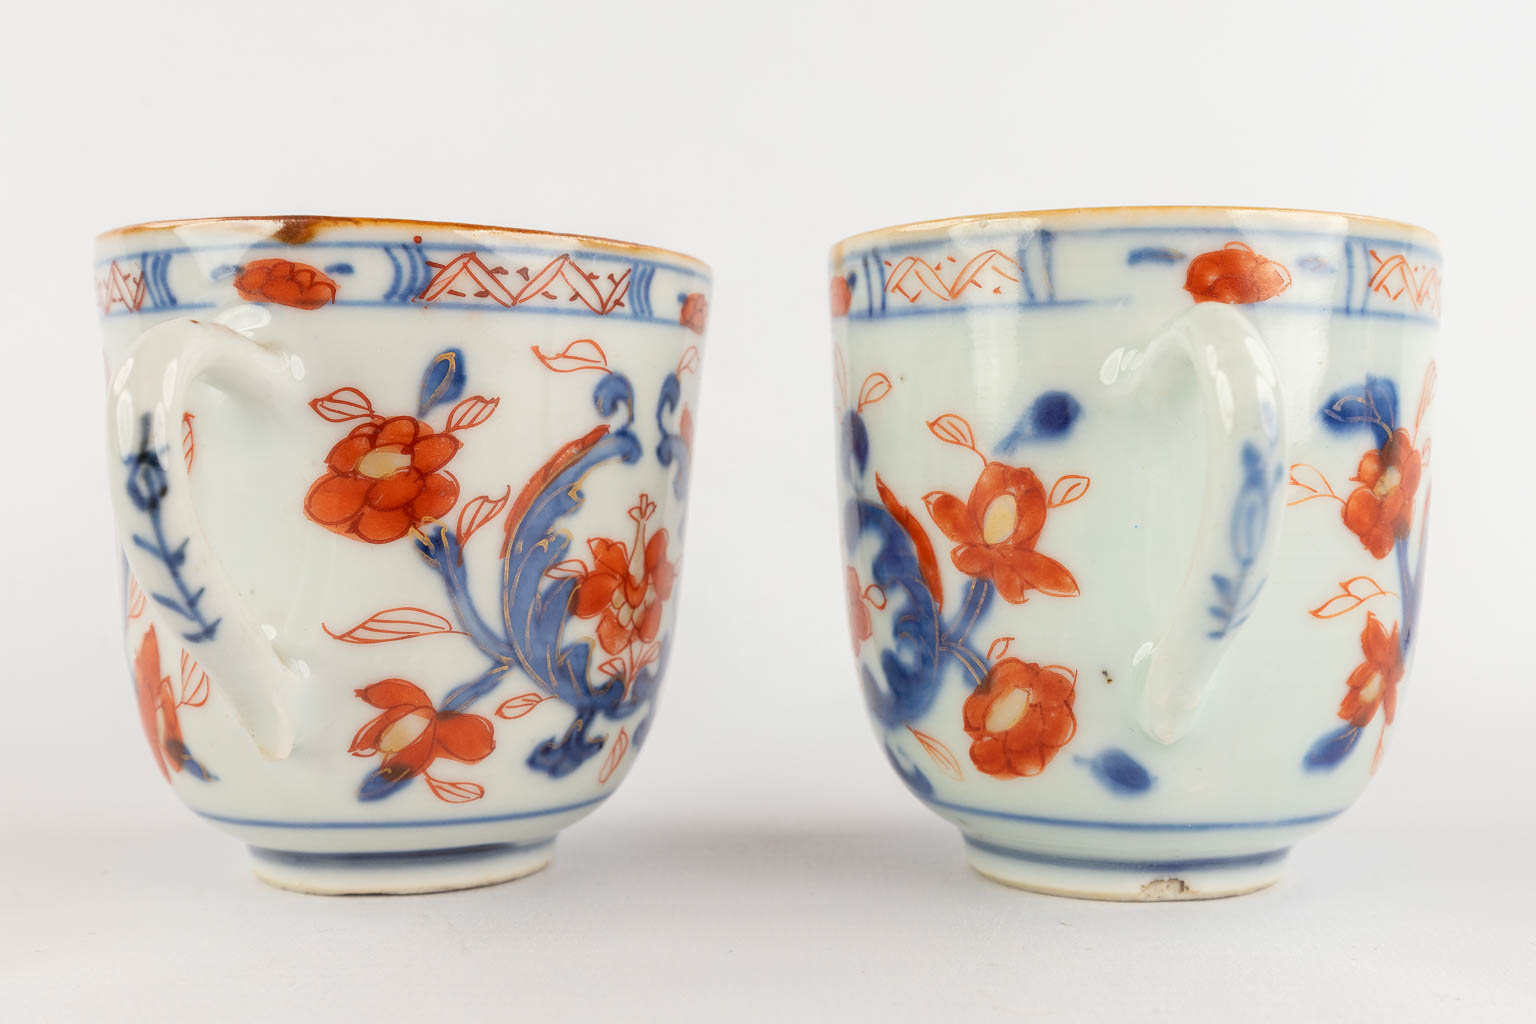 A small collection of porcelain items, Kangxi and Qianlong, blue-white, Chinese Imari. 18th/19th C. (D:12 cm)